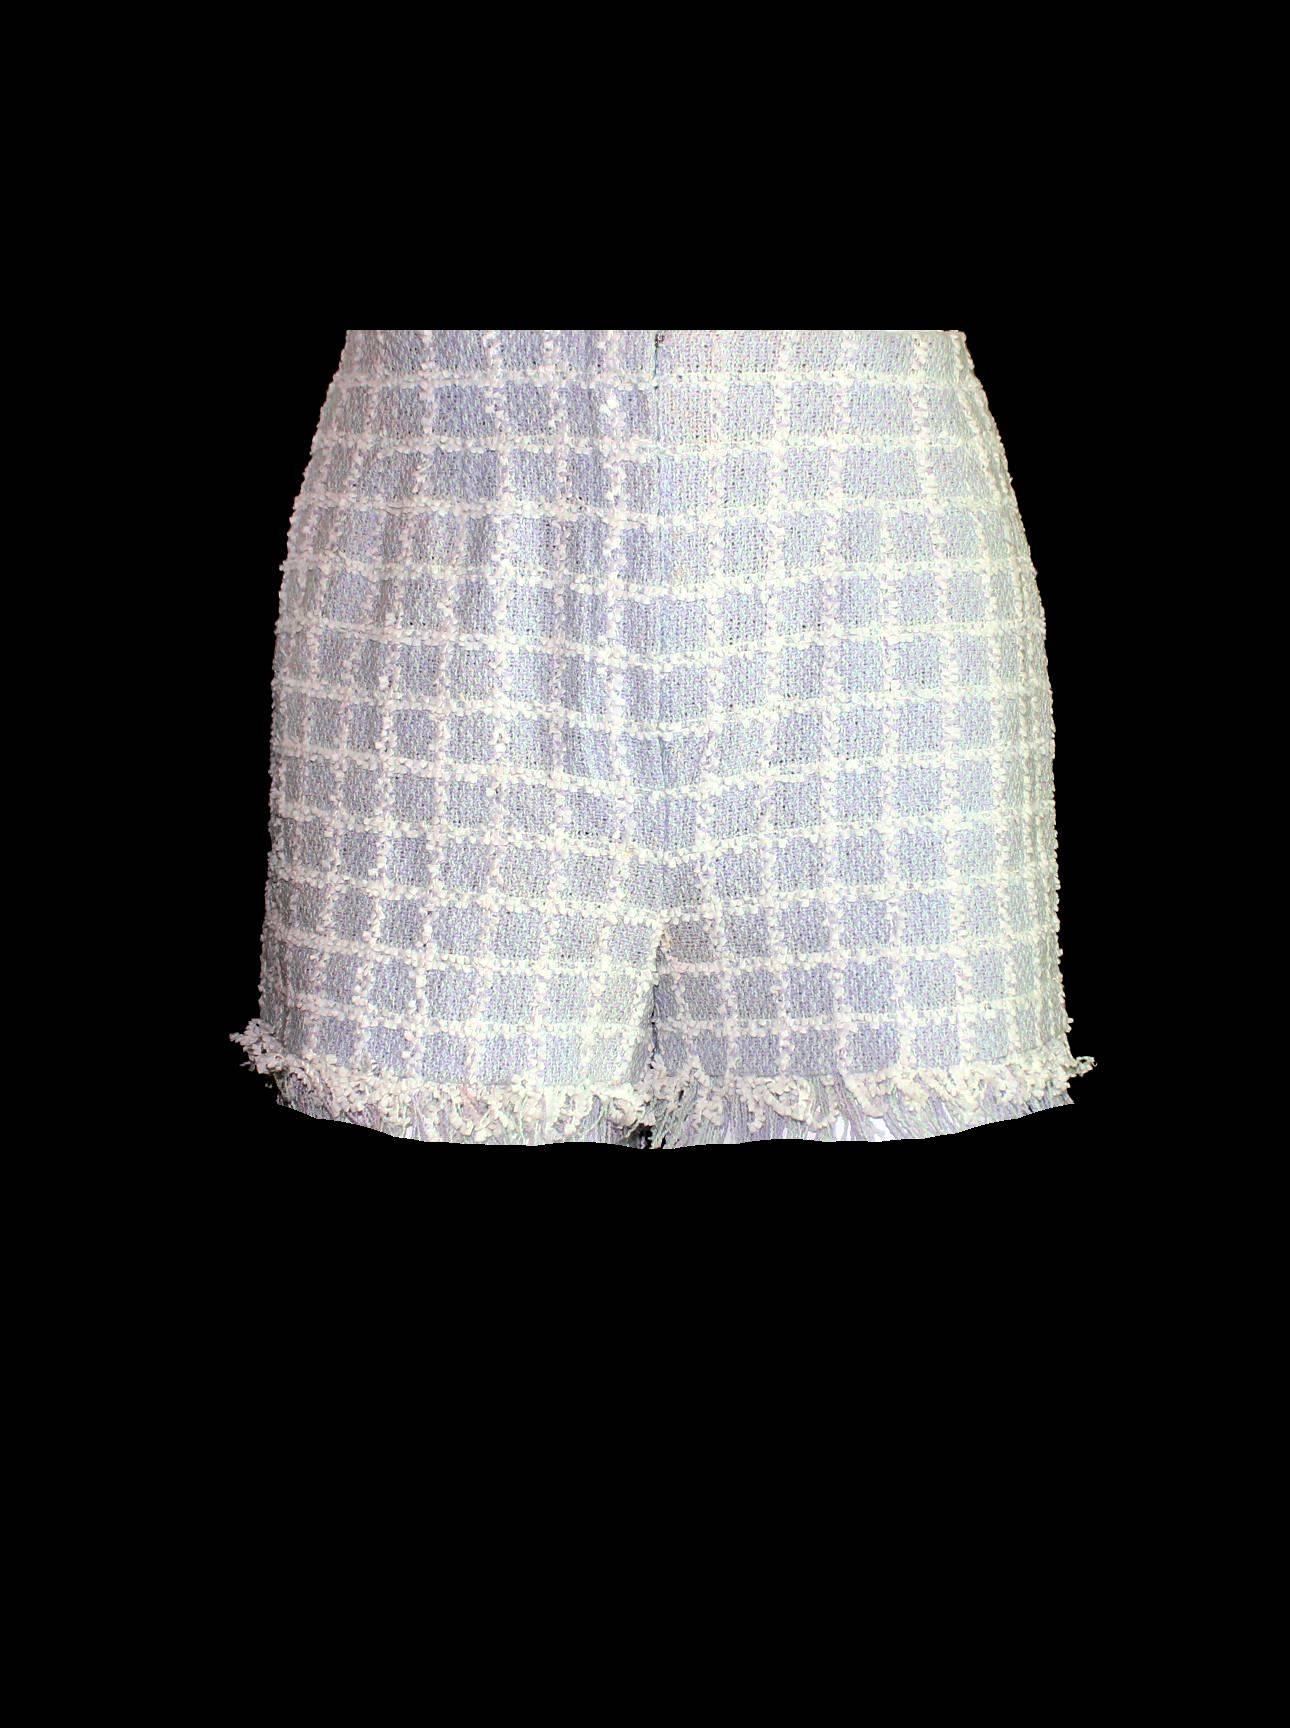 Beautiful Chanel tweed shorts
Designed by Karl Lagerfeld for his iconic 1994 Chanel collection
Fringed details
Amazing pastel colors
Lined with CC logo silk
Closes with zip in front
Made in France
Dry Clean Only